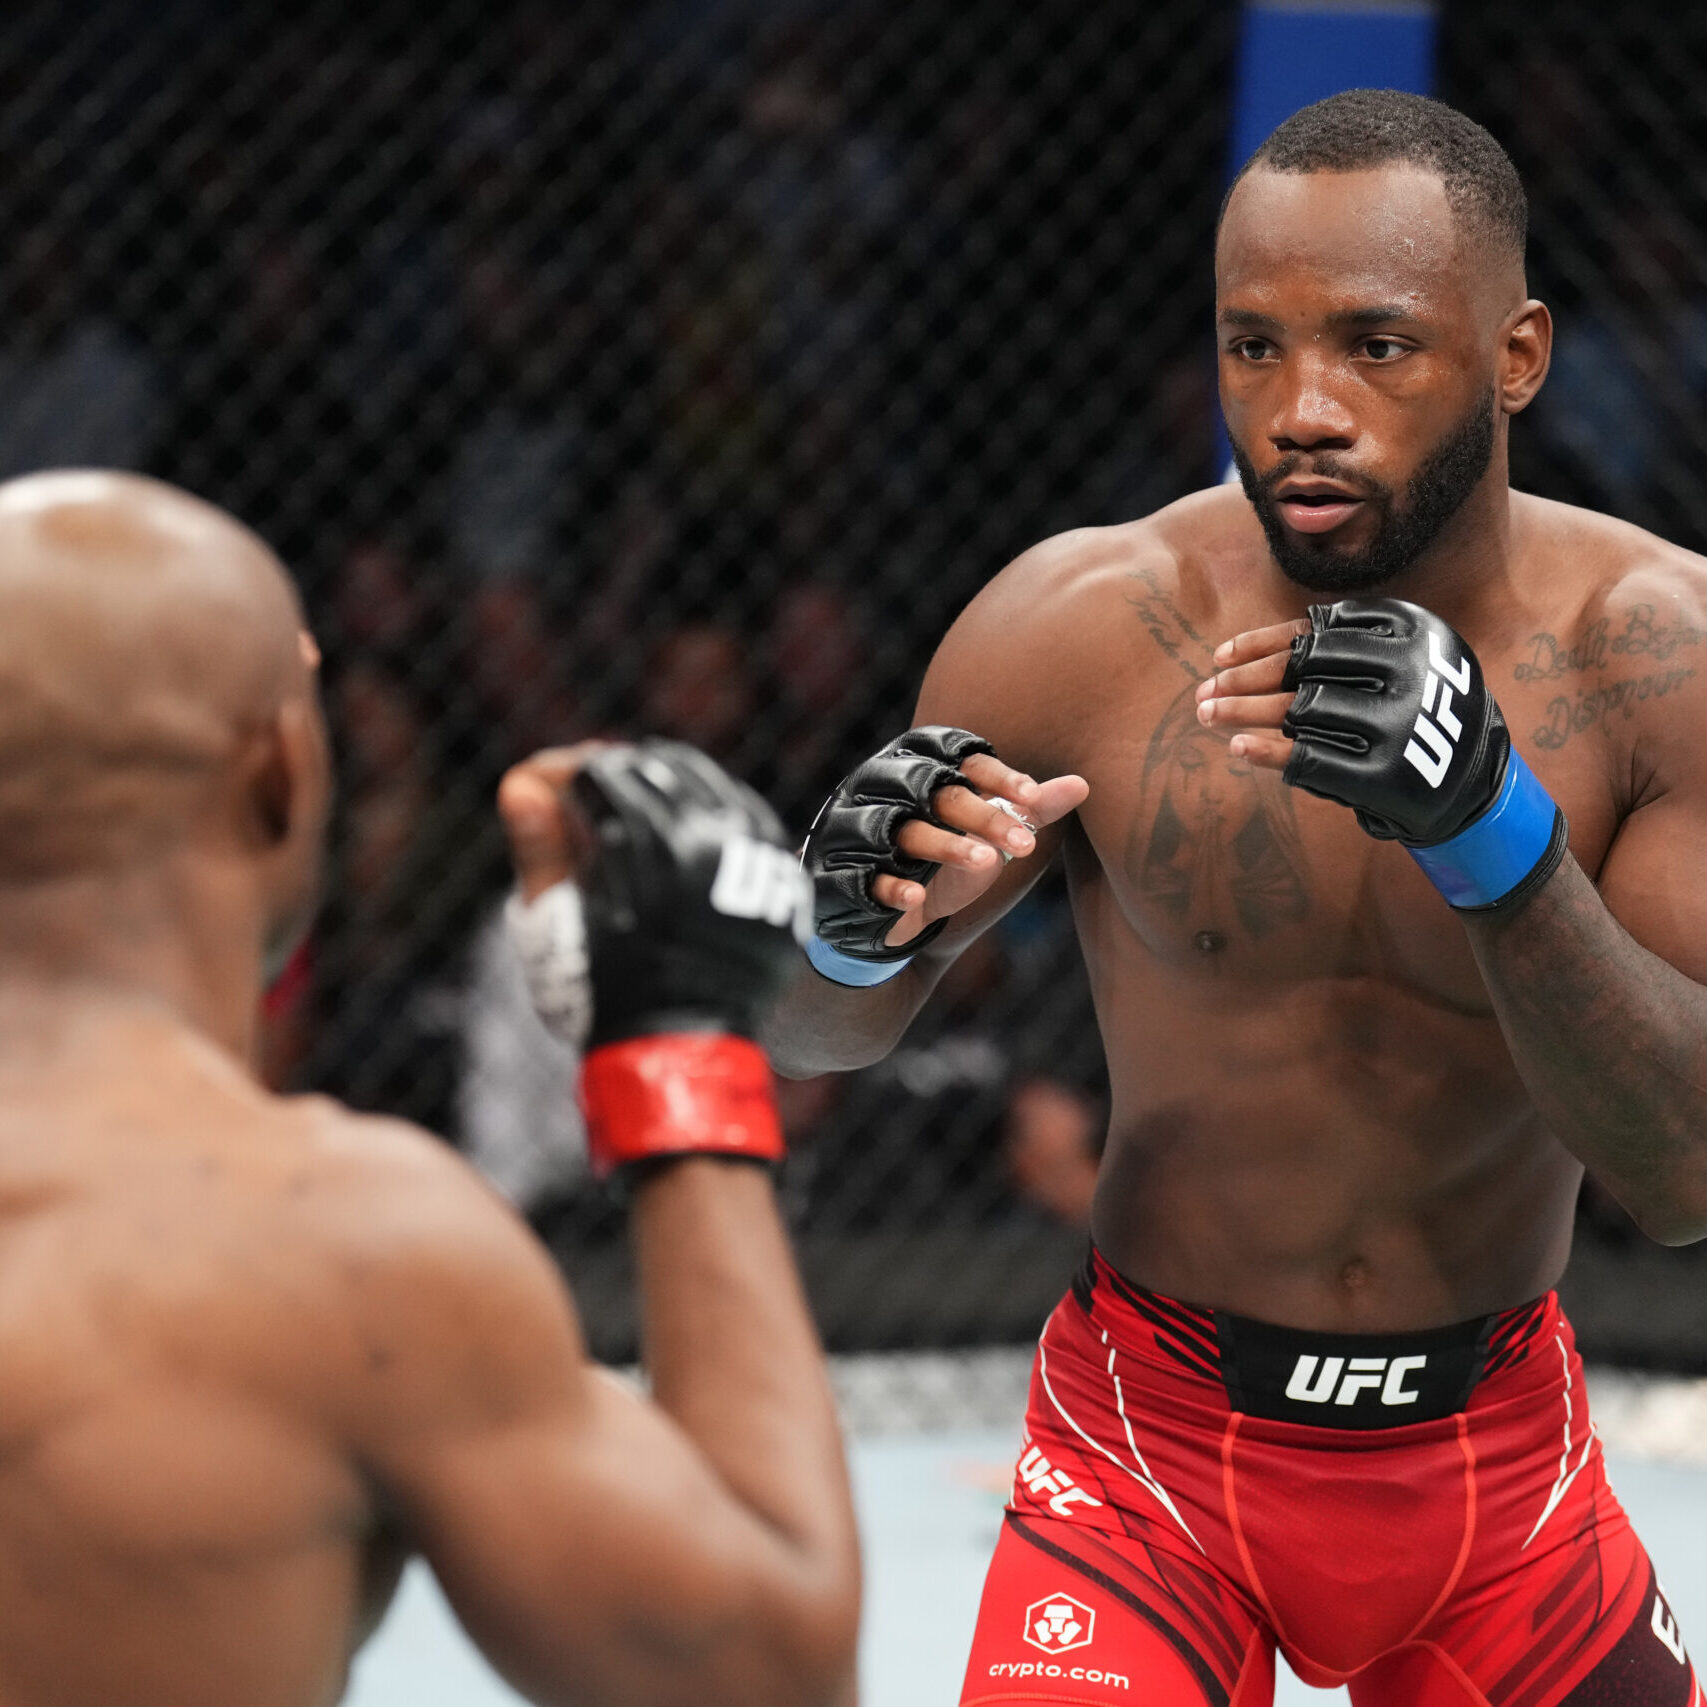 SALT LAKE CITY, UTAH - AUGUST 20: (R-L) Leon Edwards of Jamaica faces Kamaru Usman of Nigeria in the UFC welterweight championship fight during the UFC 278 event at Vivint Arena on August 20, 2022 in Salt Lake City, Utah. (Photo by Josh Hedges/Zuffa LLC)